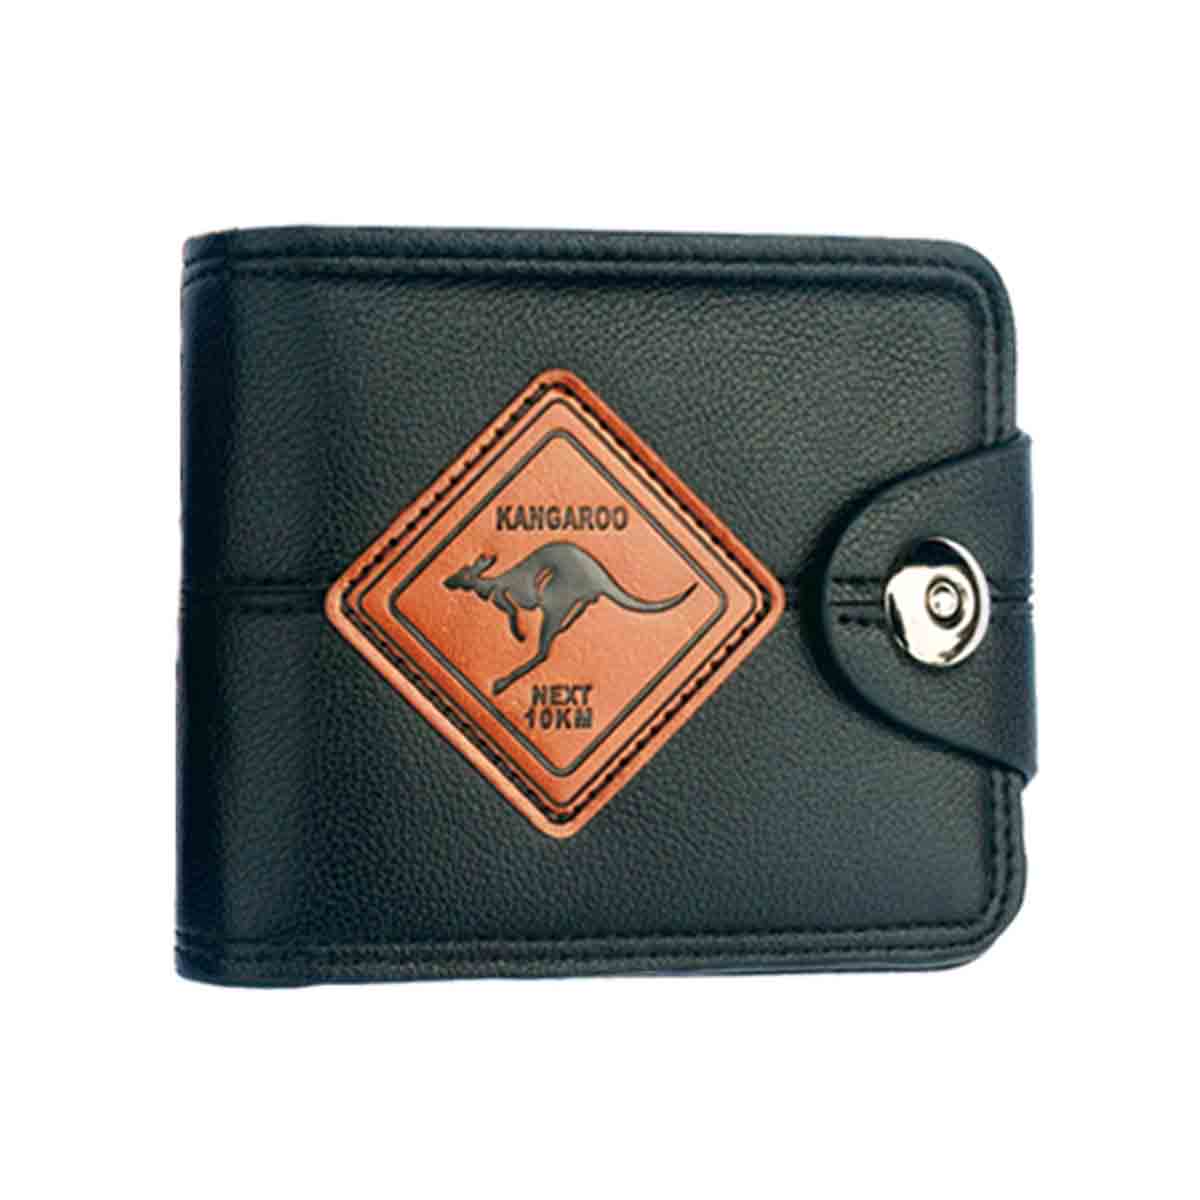 Wallet with Clip Road Sign Kangaroo